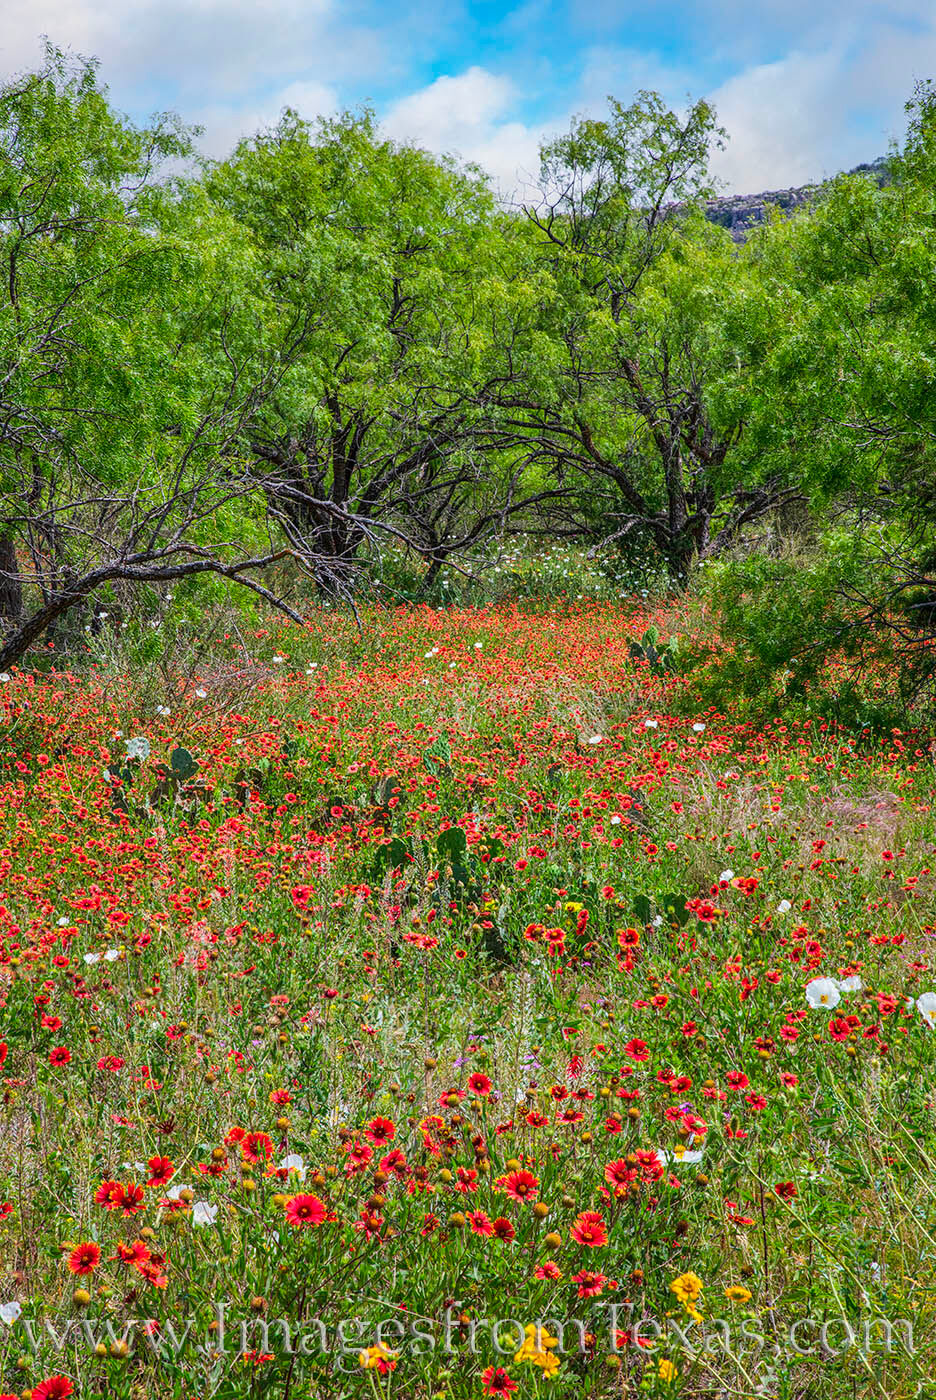 A small patch of red Firewheels (Indian Blankets) add color to a field near Llano in early May.